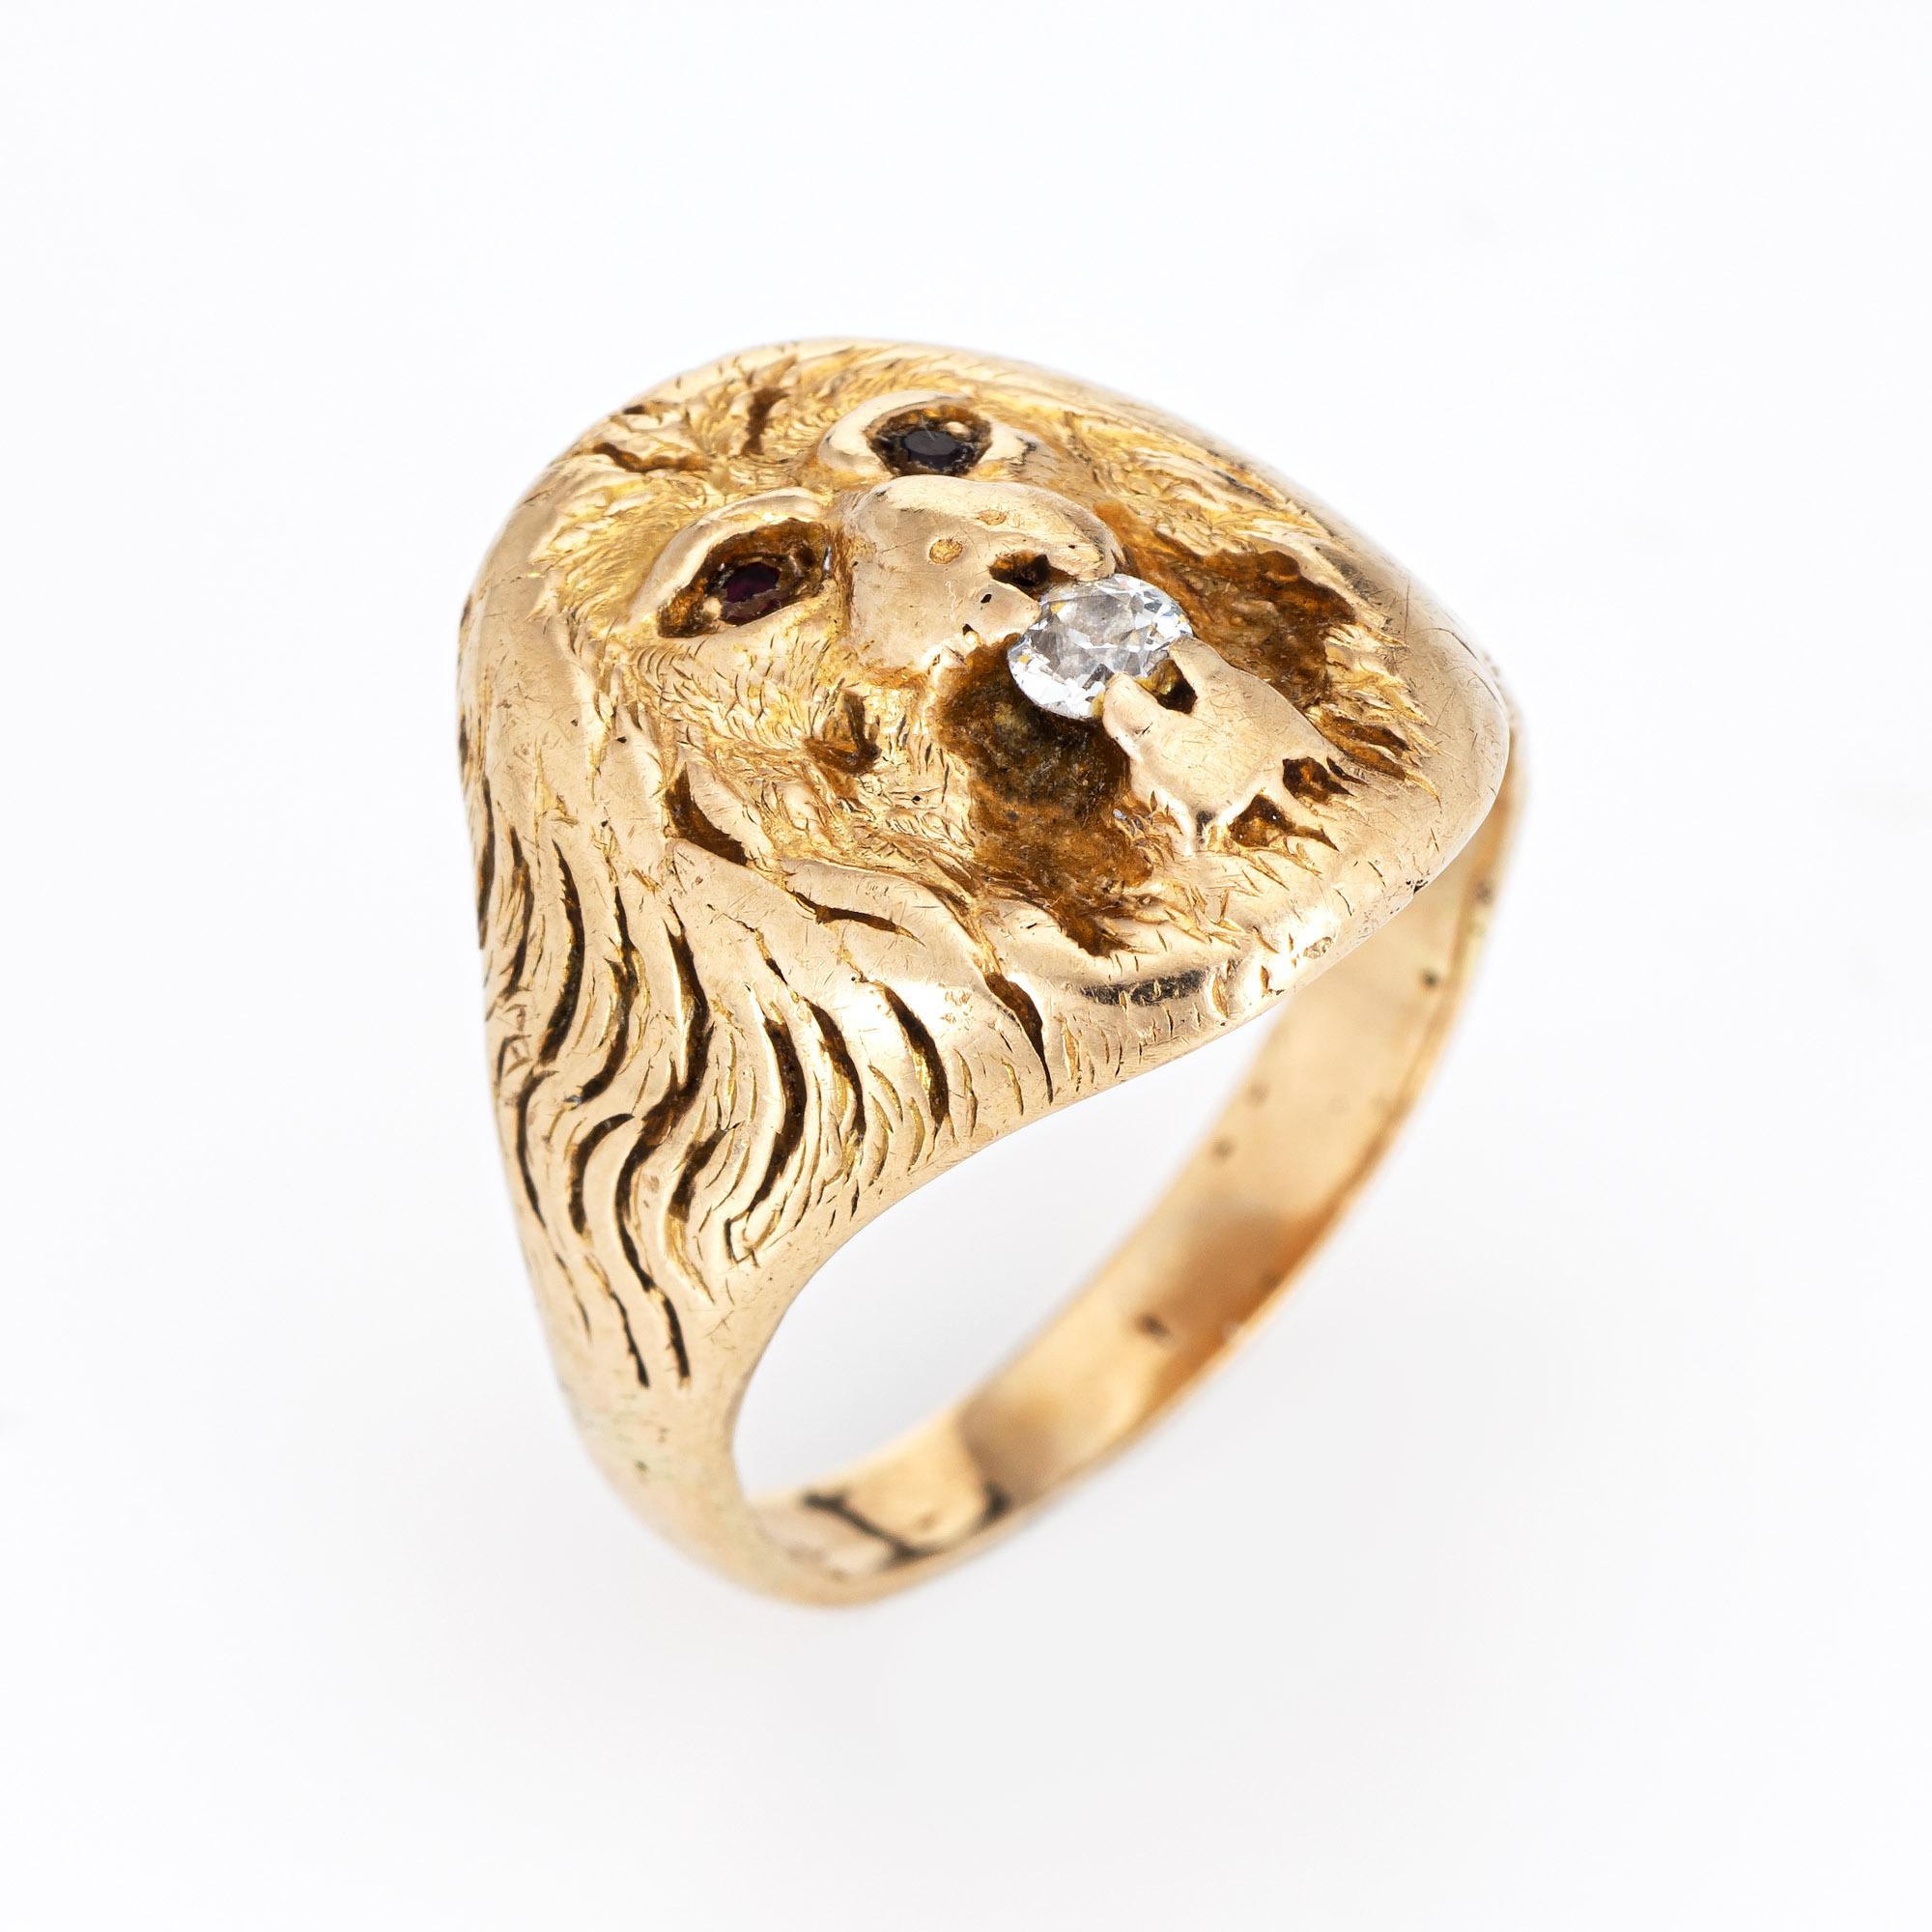 Elegant antique Victorian Lion ring (circa 1880s to 1900s), crafted in 14 karat yellow gold. 

Old mine cut diamond is estimated at 0.10 carats (estimated at H-I color and SI2 clarity. The 
garnets total an estimated 0.02 carats).
The Lion features